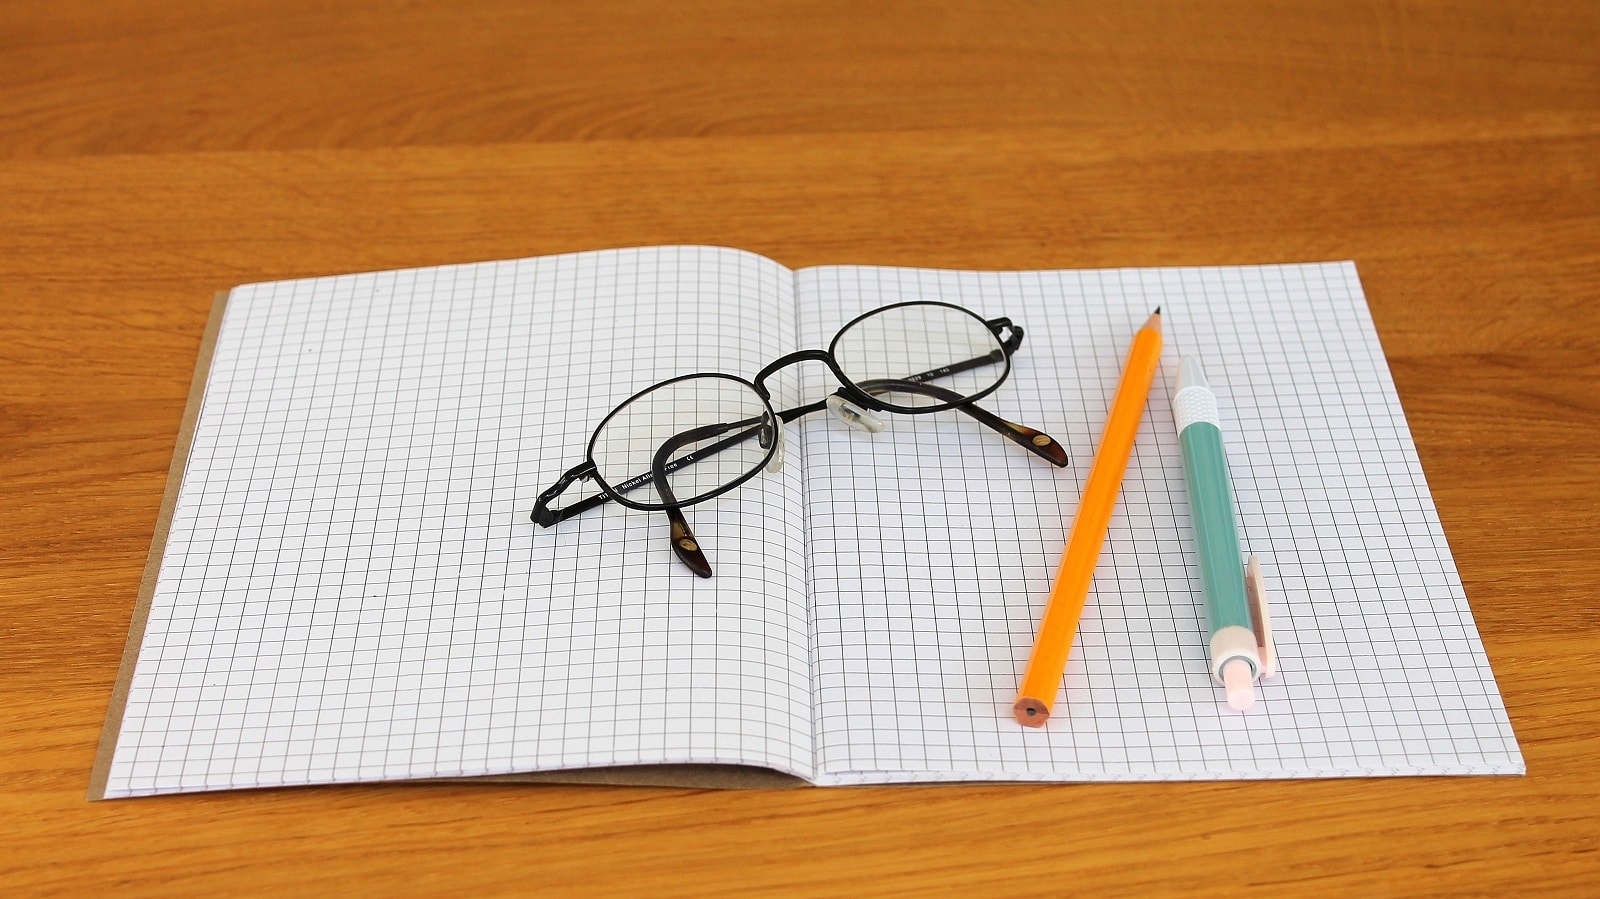 Glasses on graph paper with pencil and pen